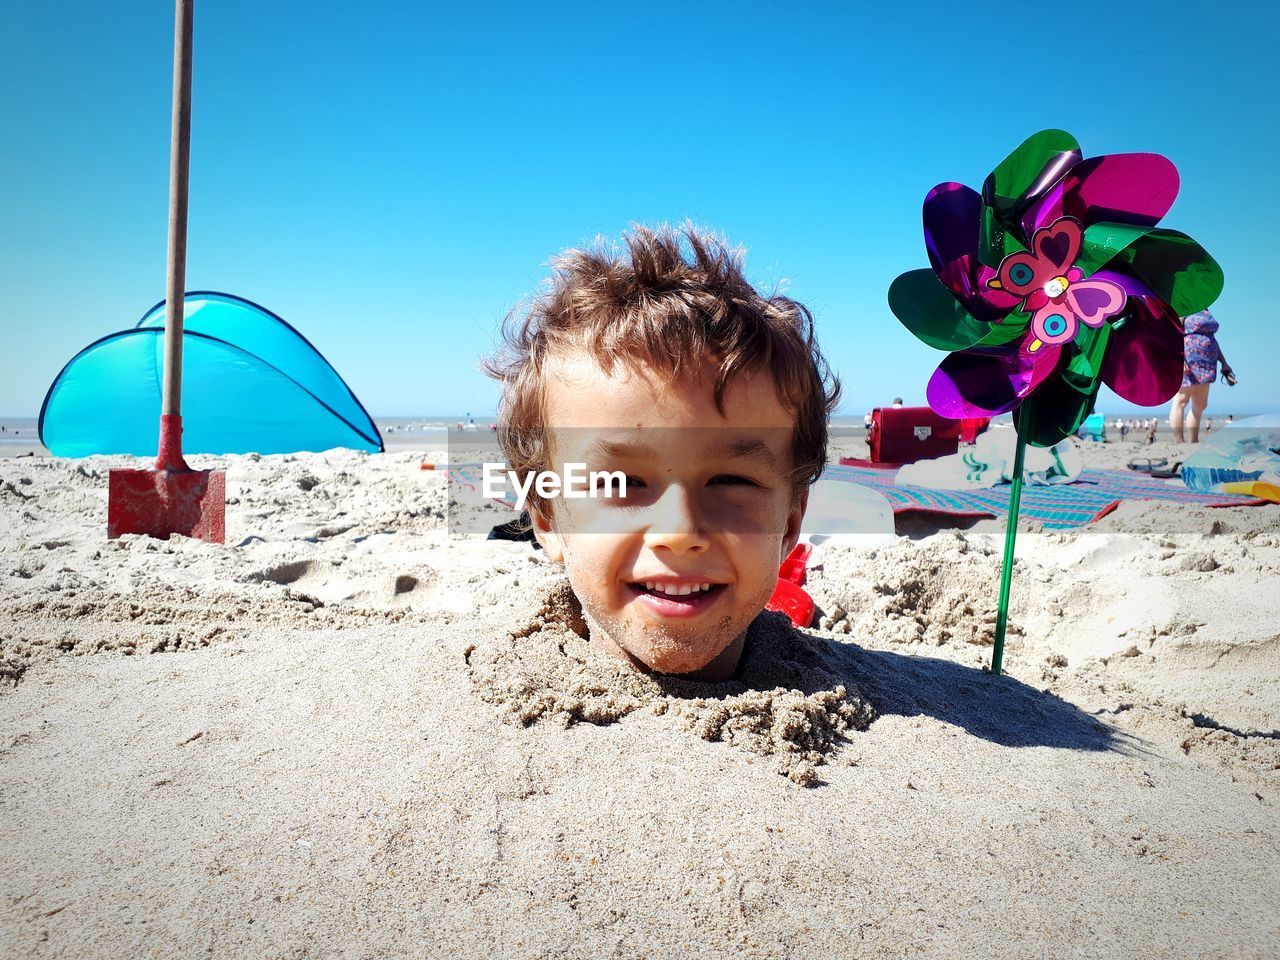 Portrait of cute boy buried in sand at beach against sky during sunny day